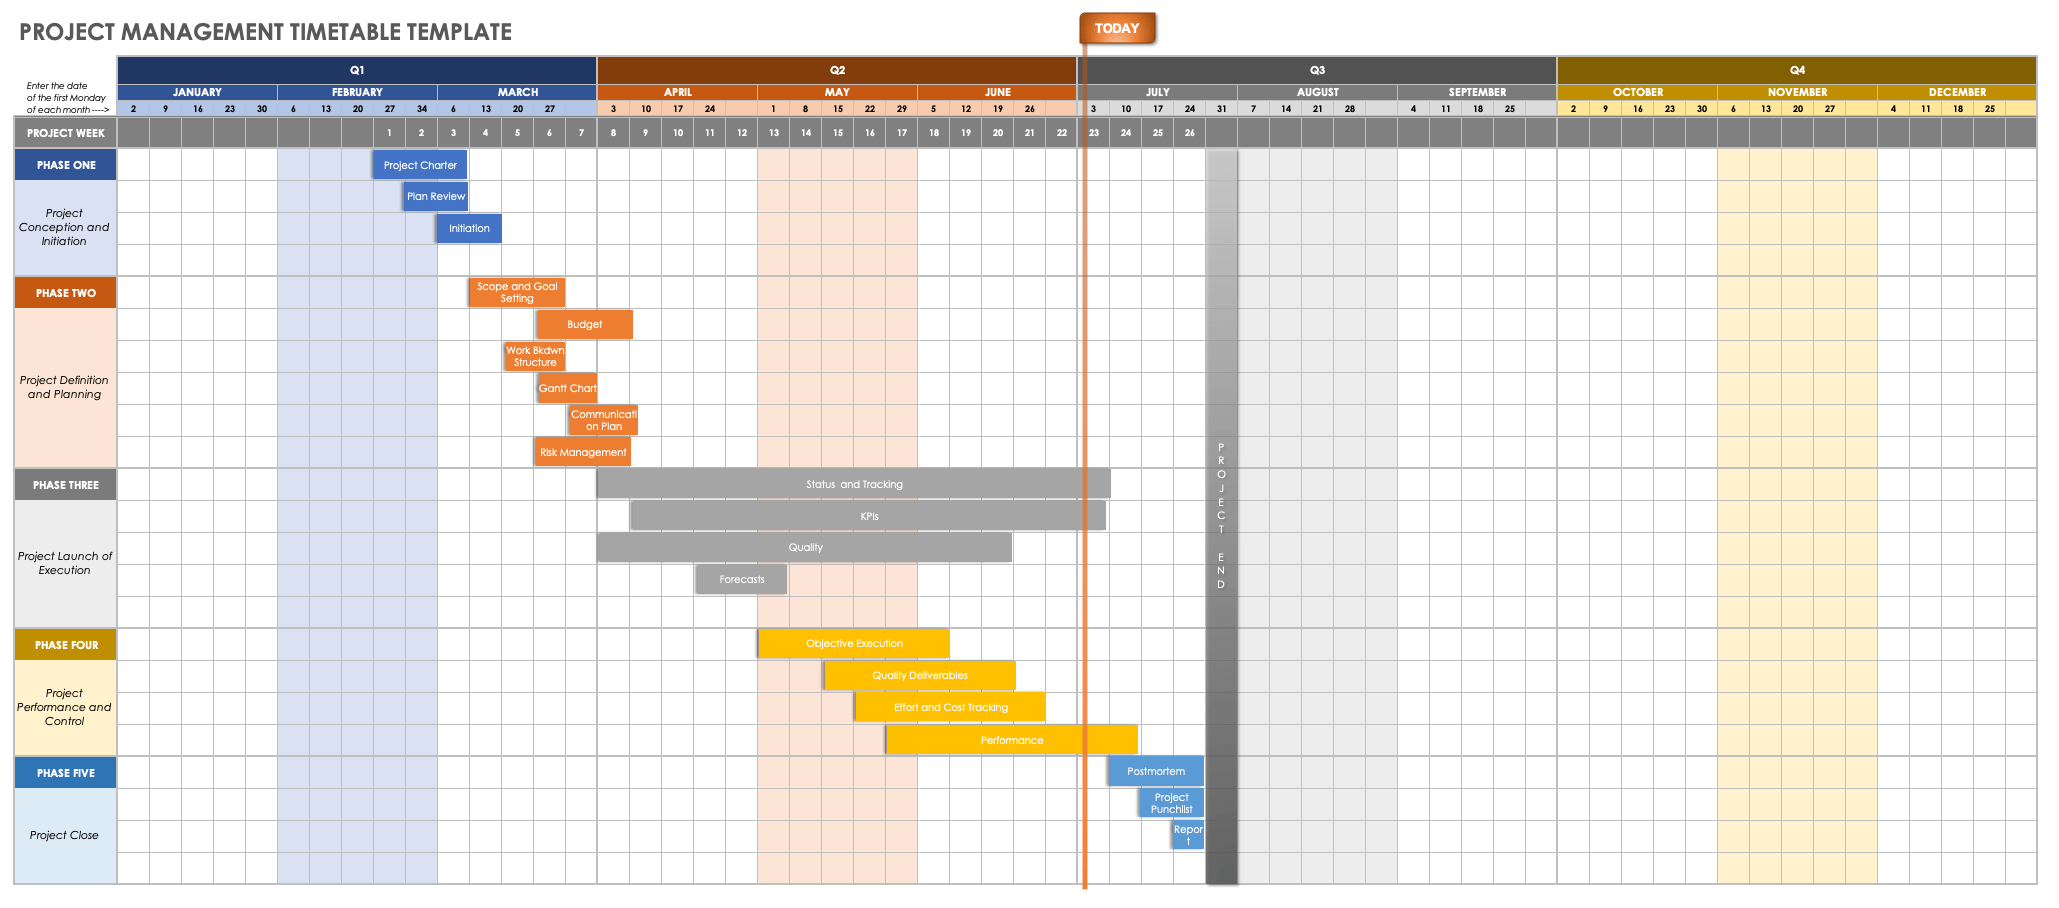 Project Management Timetable Template